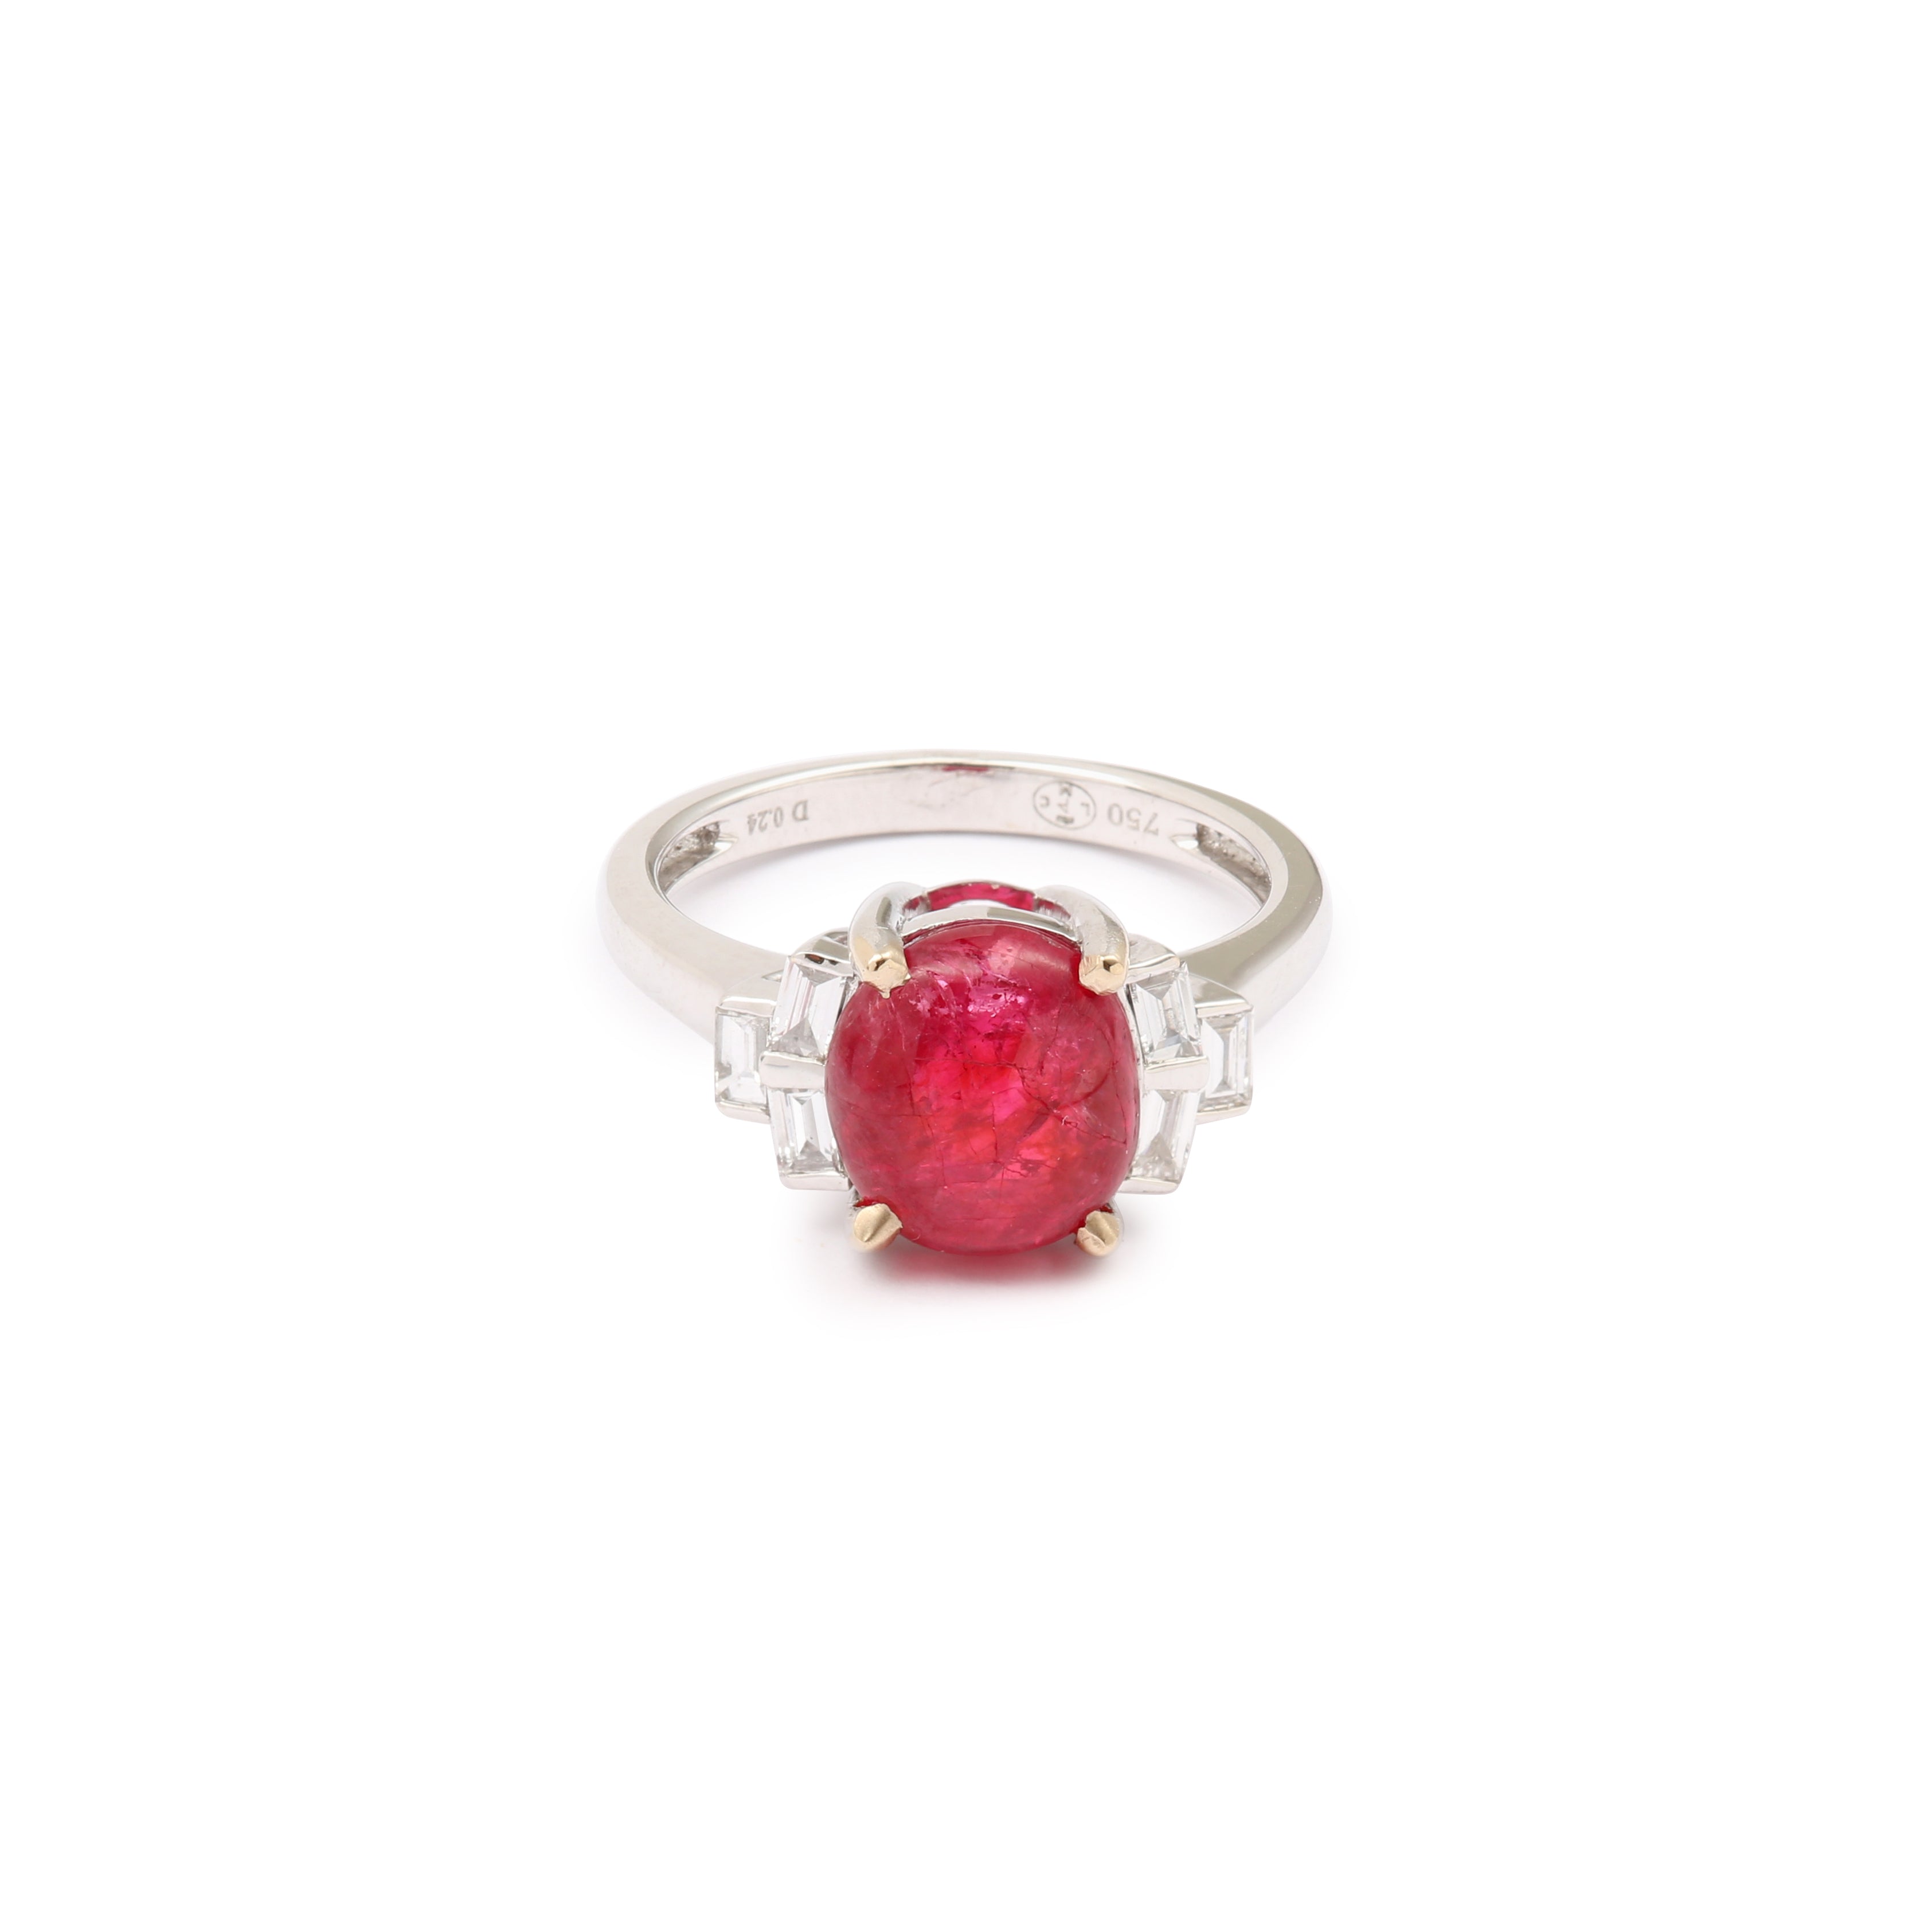 Certified Unheated Burma Cabochon Spinel Diamond 18K White Gold Ring